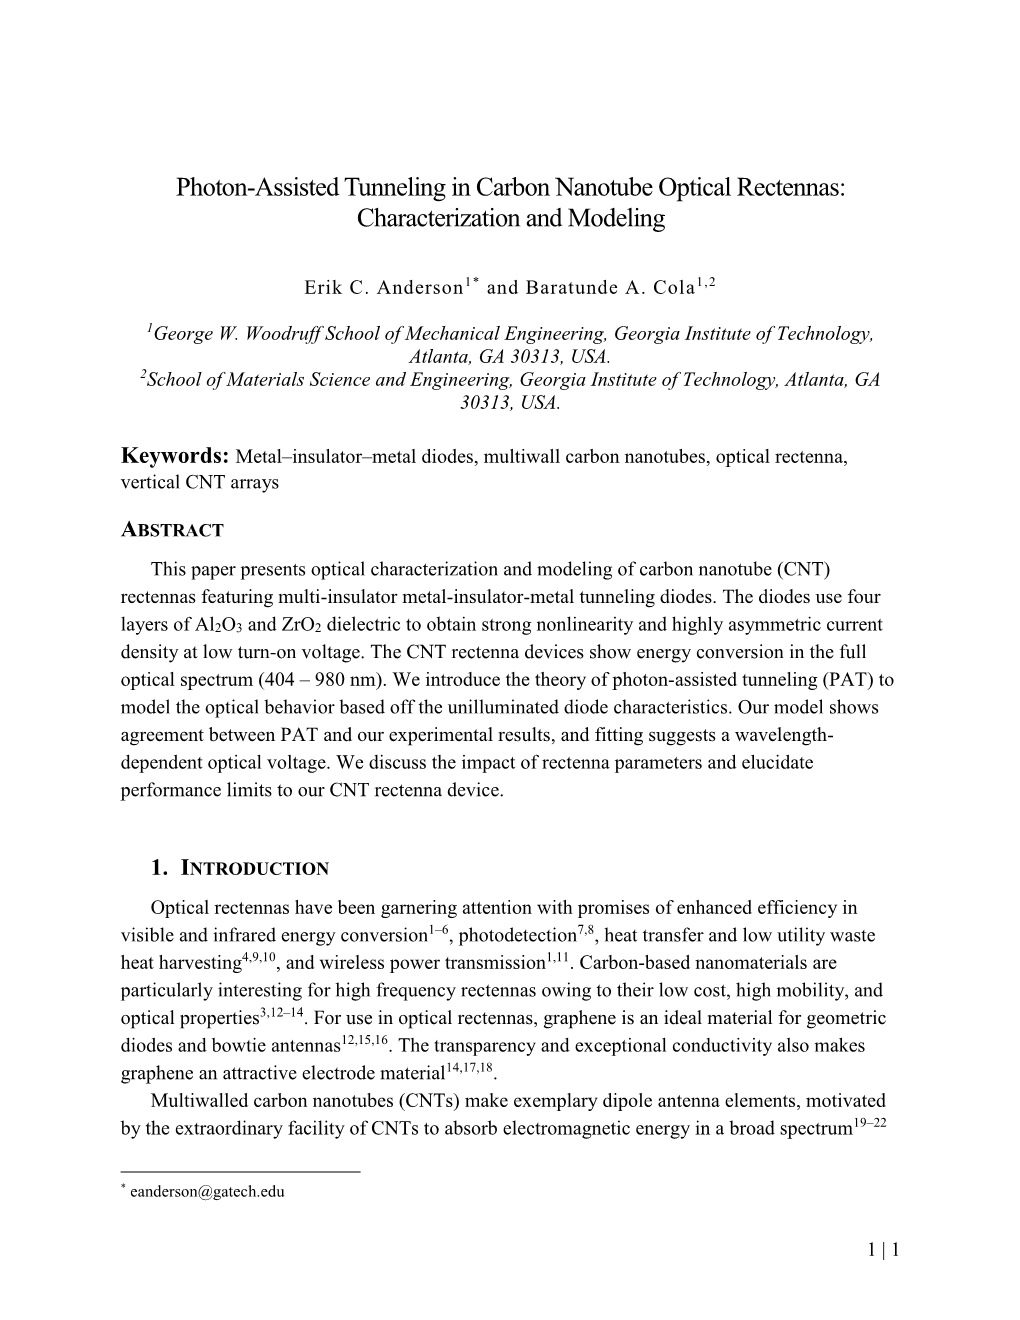 Photon-Assisted Tunneling in Carbon Nanotube Optical Rectennas: Characterization and Modeling